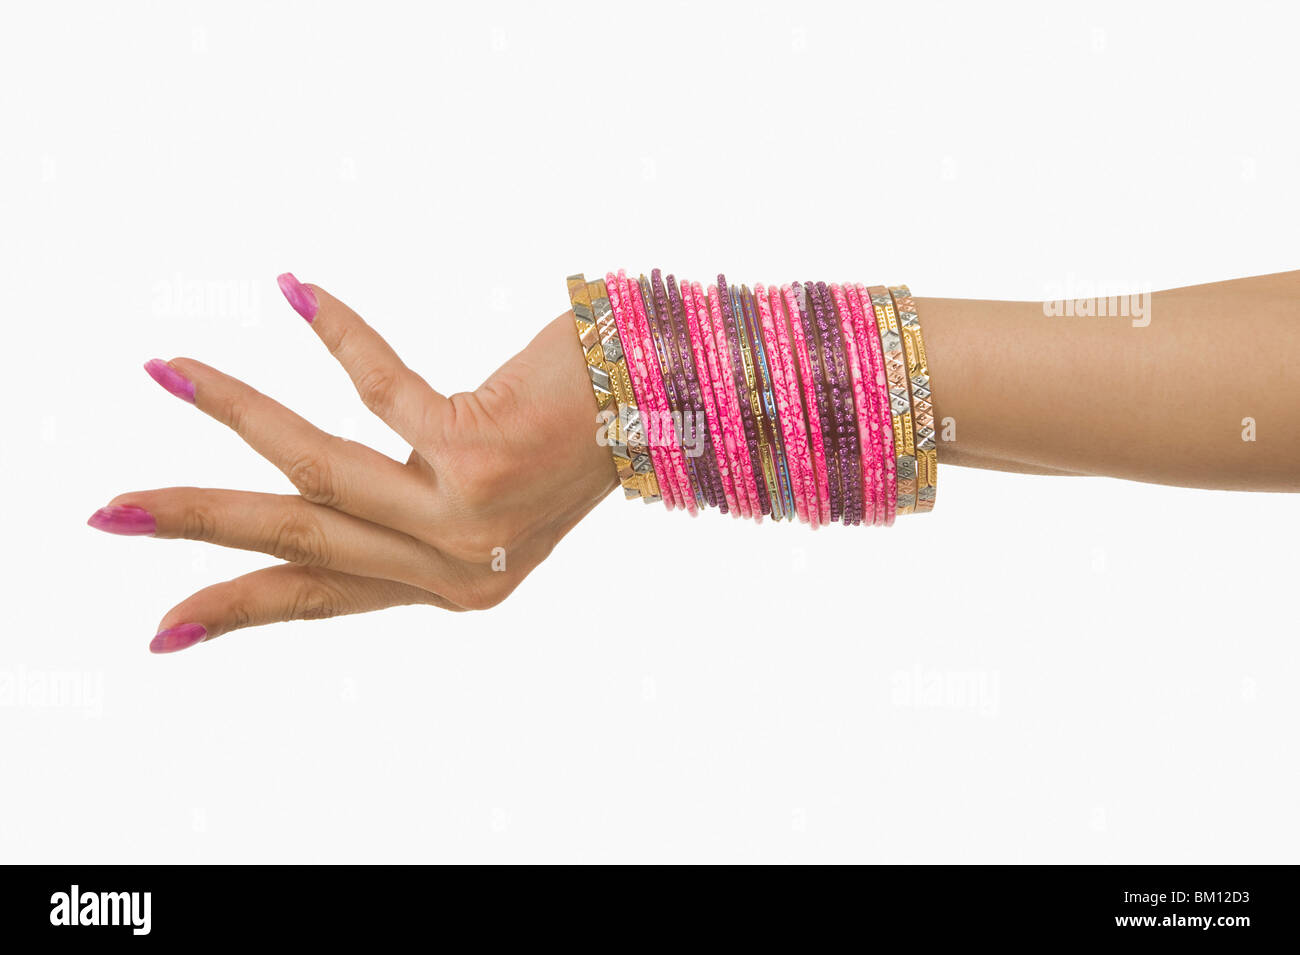 Woman's hand with bangles Stock Photo